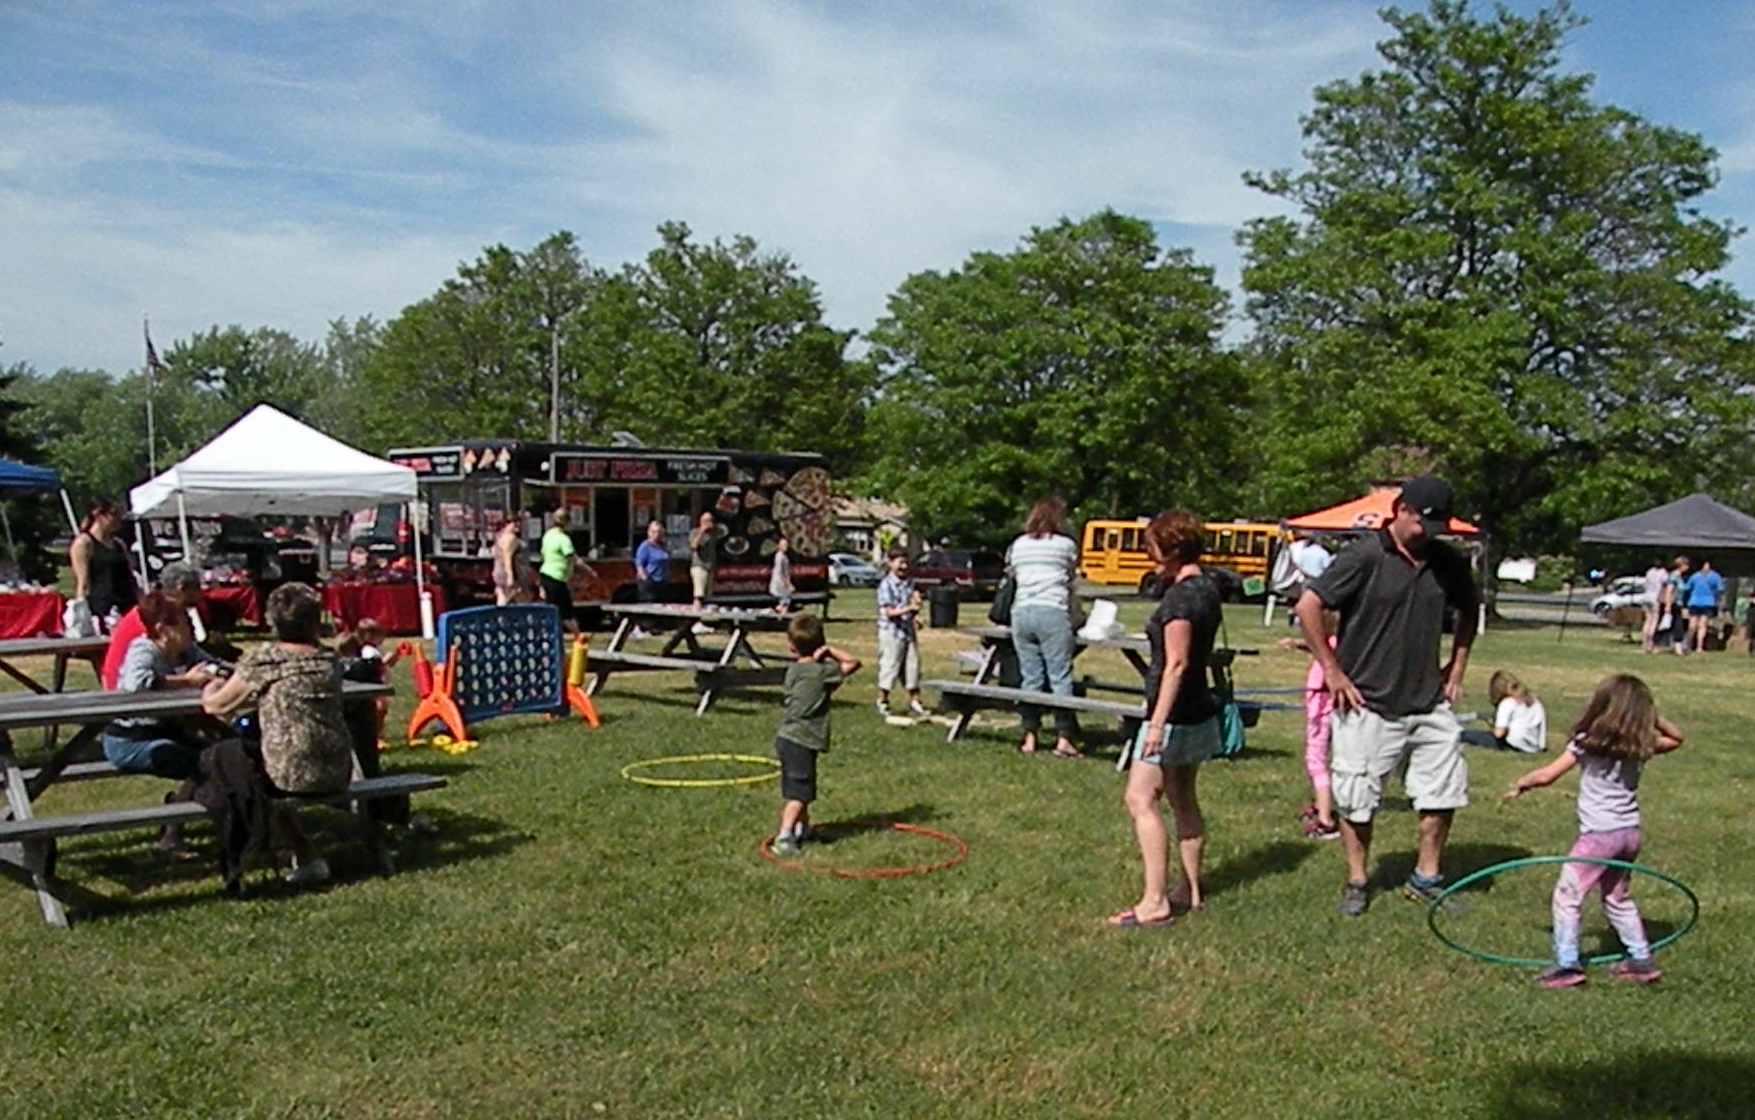 West Seneca’s outdoor farmers’ market continues on June 16 with Kids’ Day